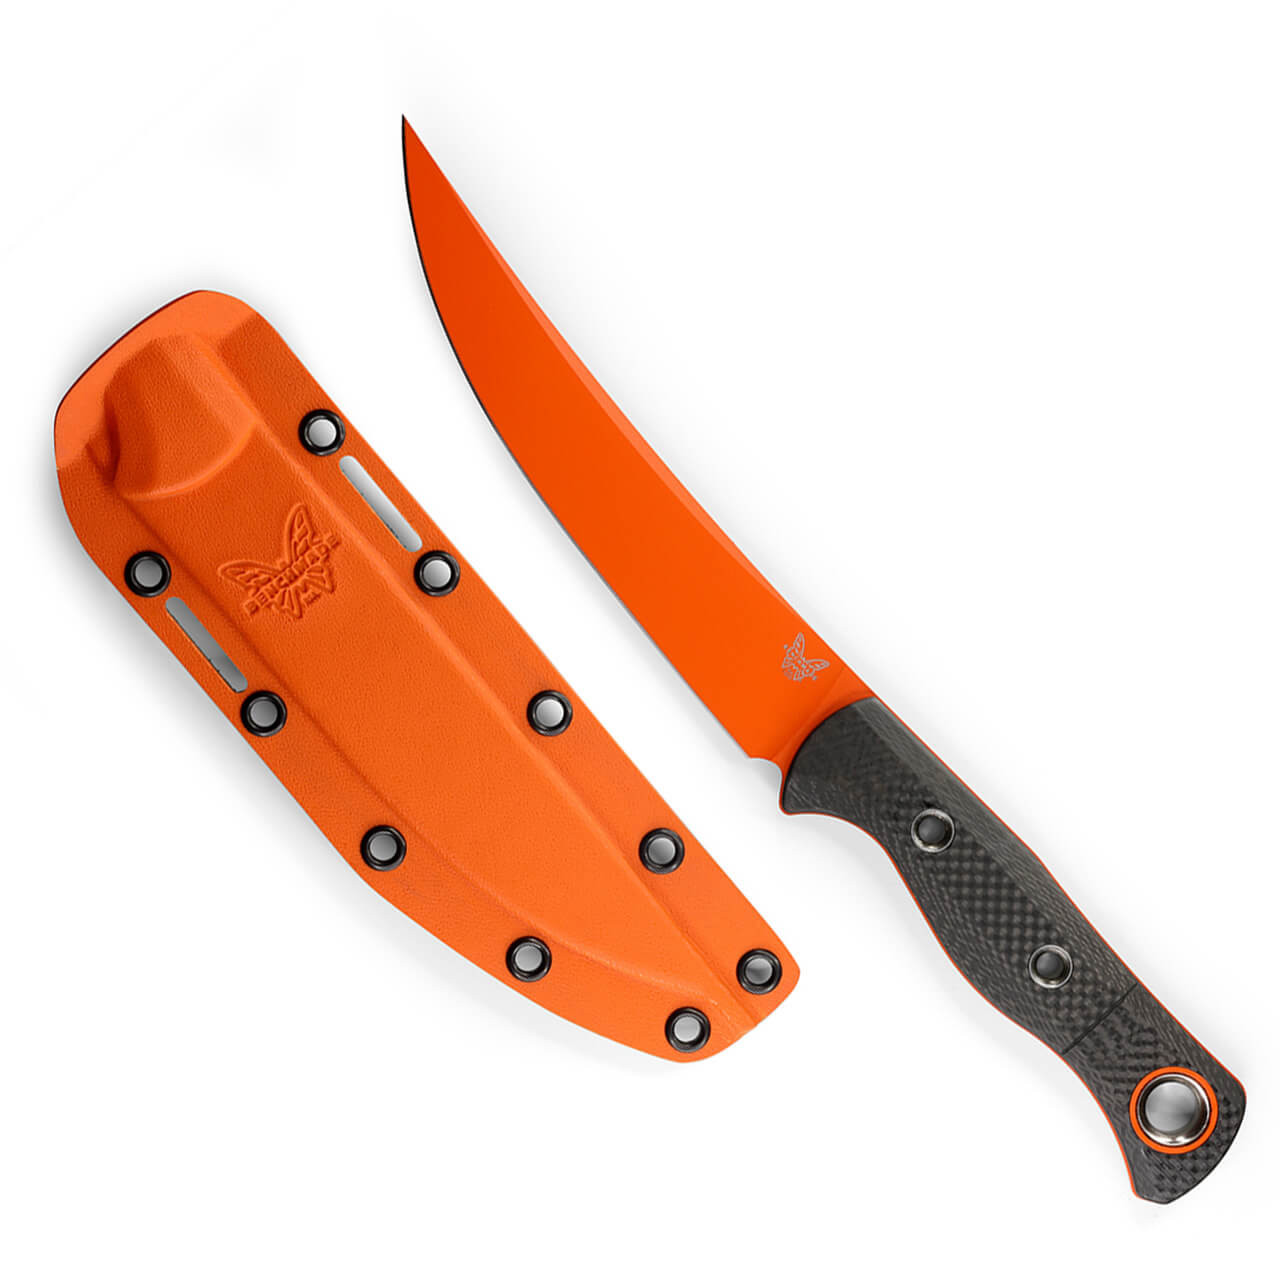 https://cdn11.bigcommerce.com/s-1tyihs272l/images/stencil/1280x1280/products/6478/14863/Benchmade-1500OR-2-Meatcrafter-Carbon-Fiber-Handle-Orange-Cerakote-Blade-Sheath__28005.1651174465.jpg?c=2